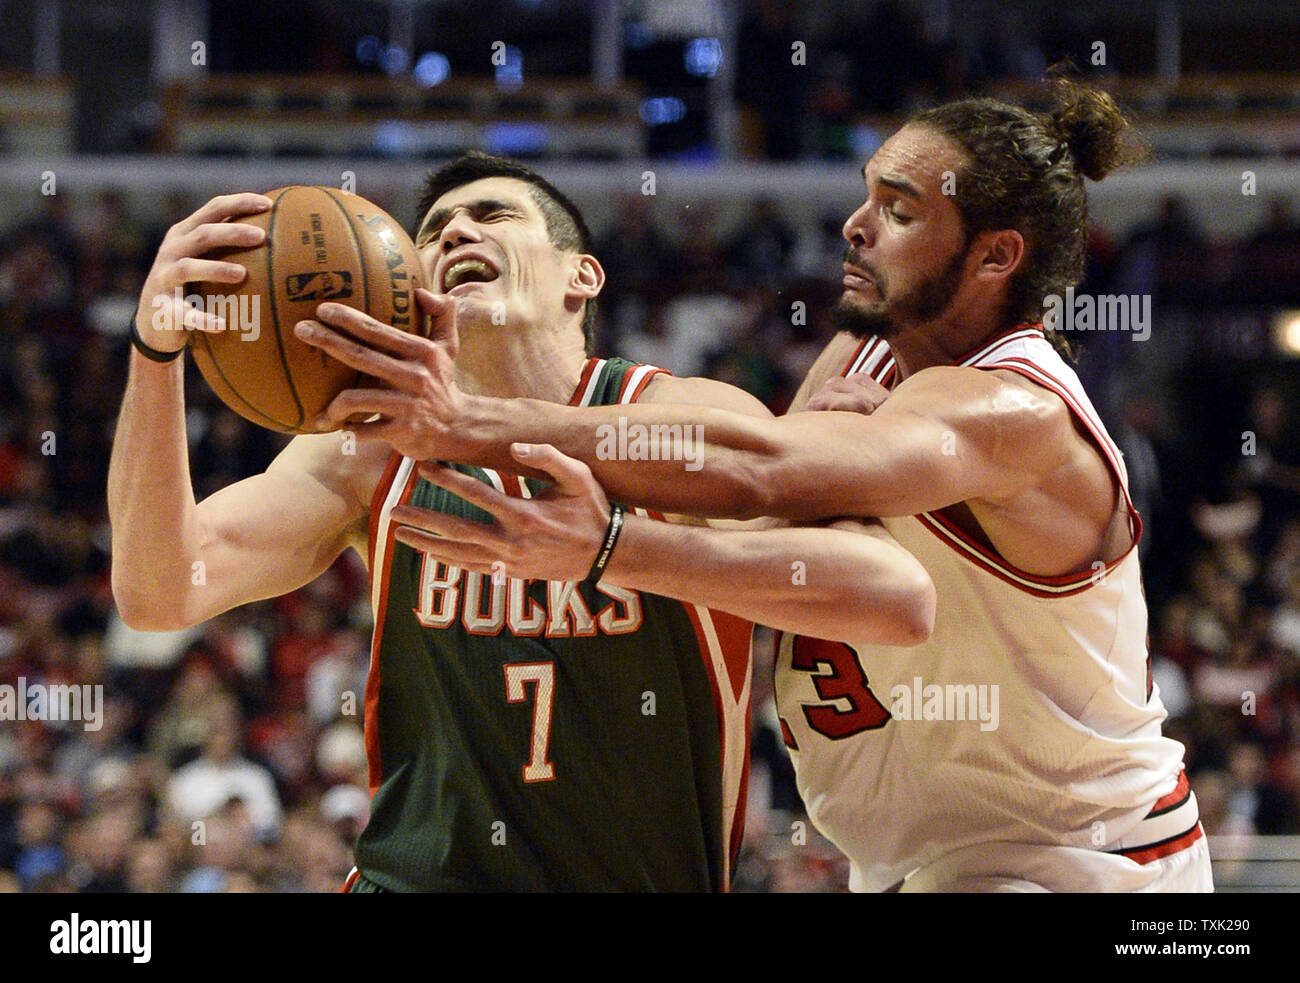 Chicago Bulls center Joakim Noah (R) fouls Milwaukee Bucks forward Ersan Ilyasova as he drives to the basket during the third quarter of game 2 the first round of the NBA Playoffs at the United Center on April 20, 2015 in Chicago. The Bulls defeated the Bucks 91-82 and lead the best of seven series 2-0.     Photo by Brian Kersey/UPI Stock Photo